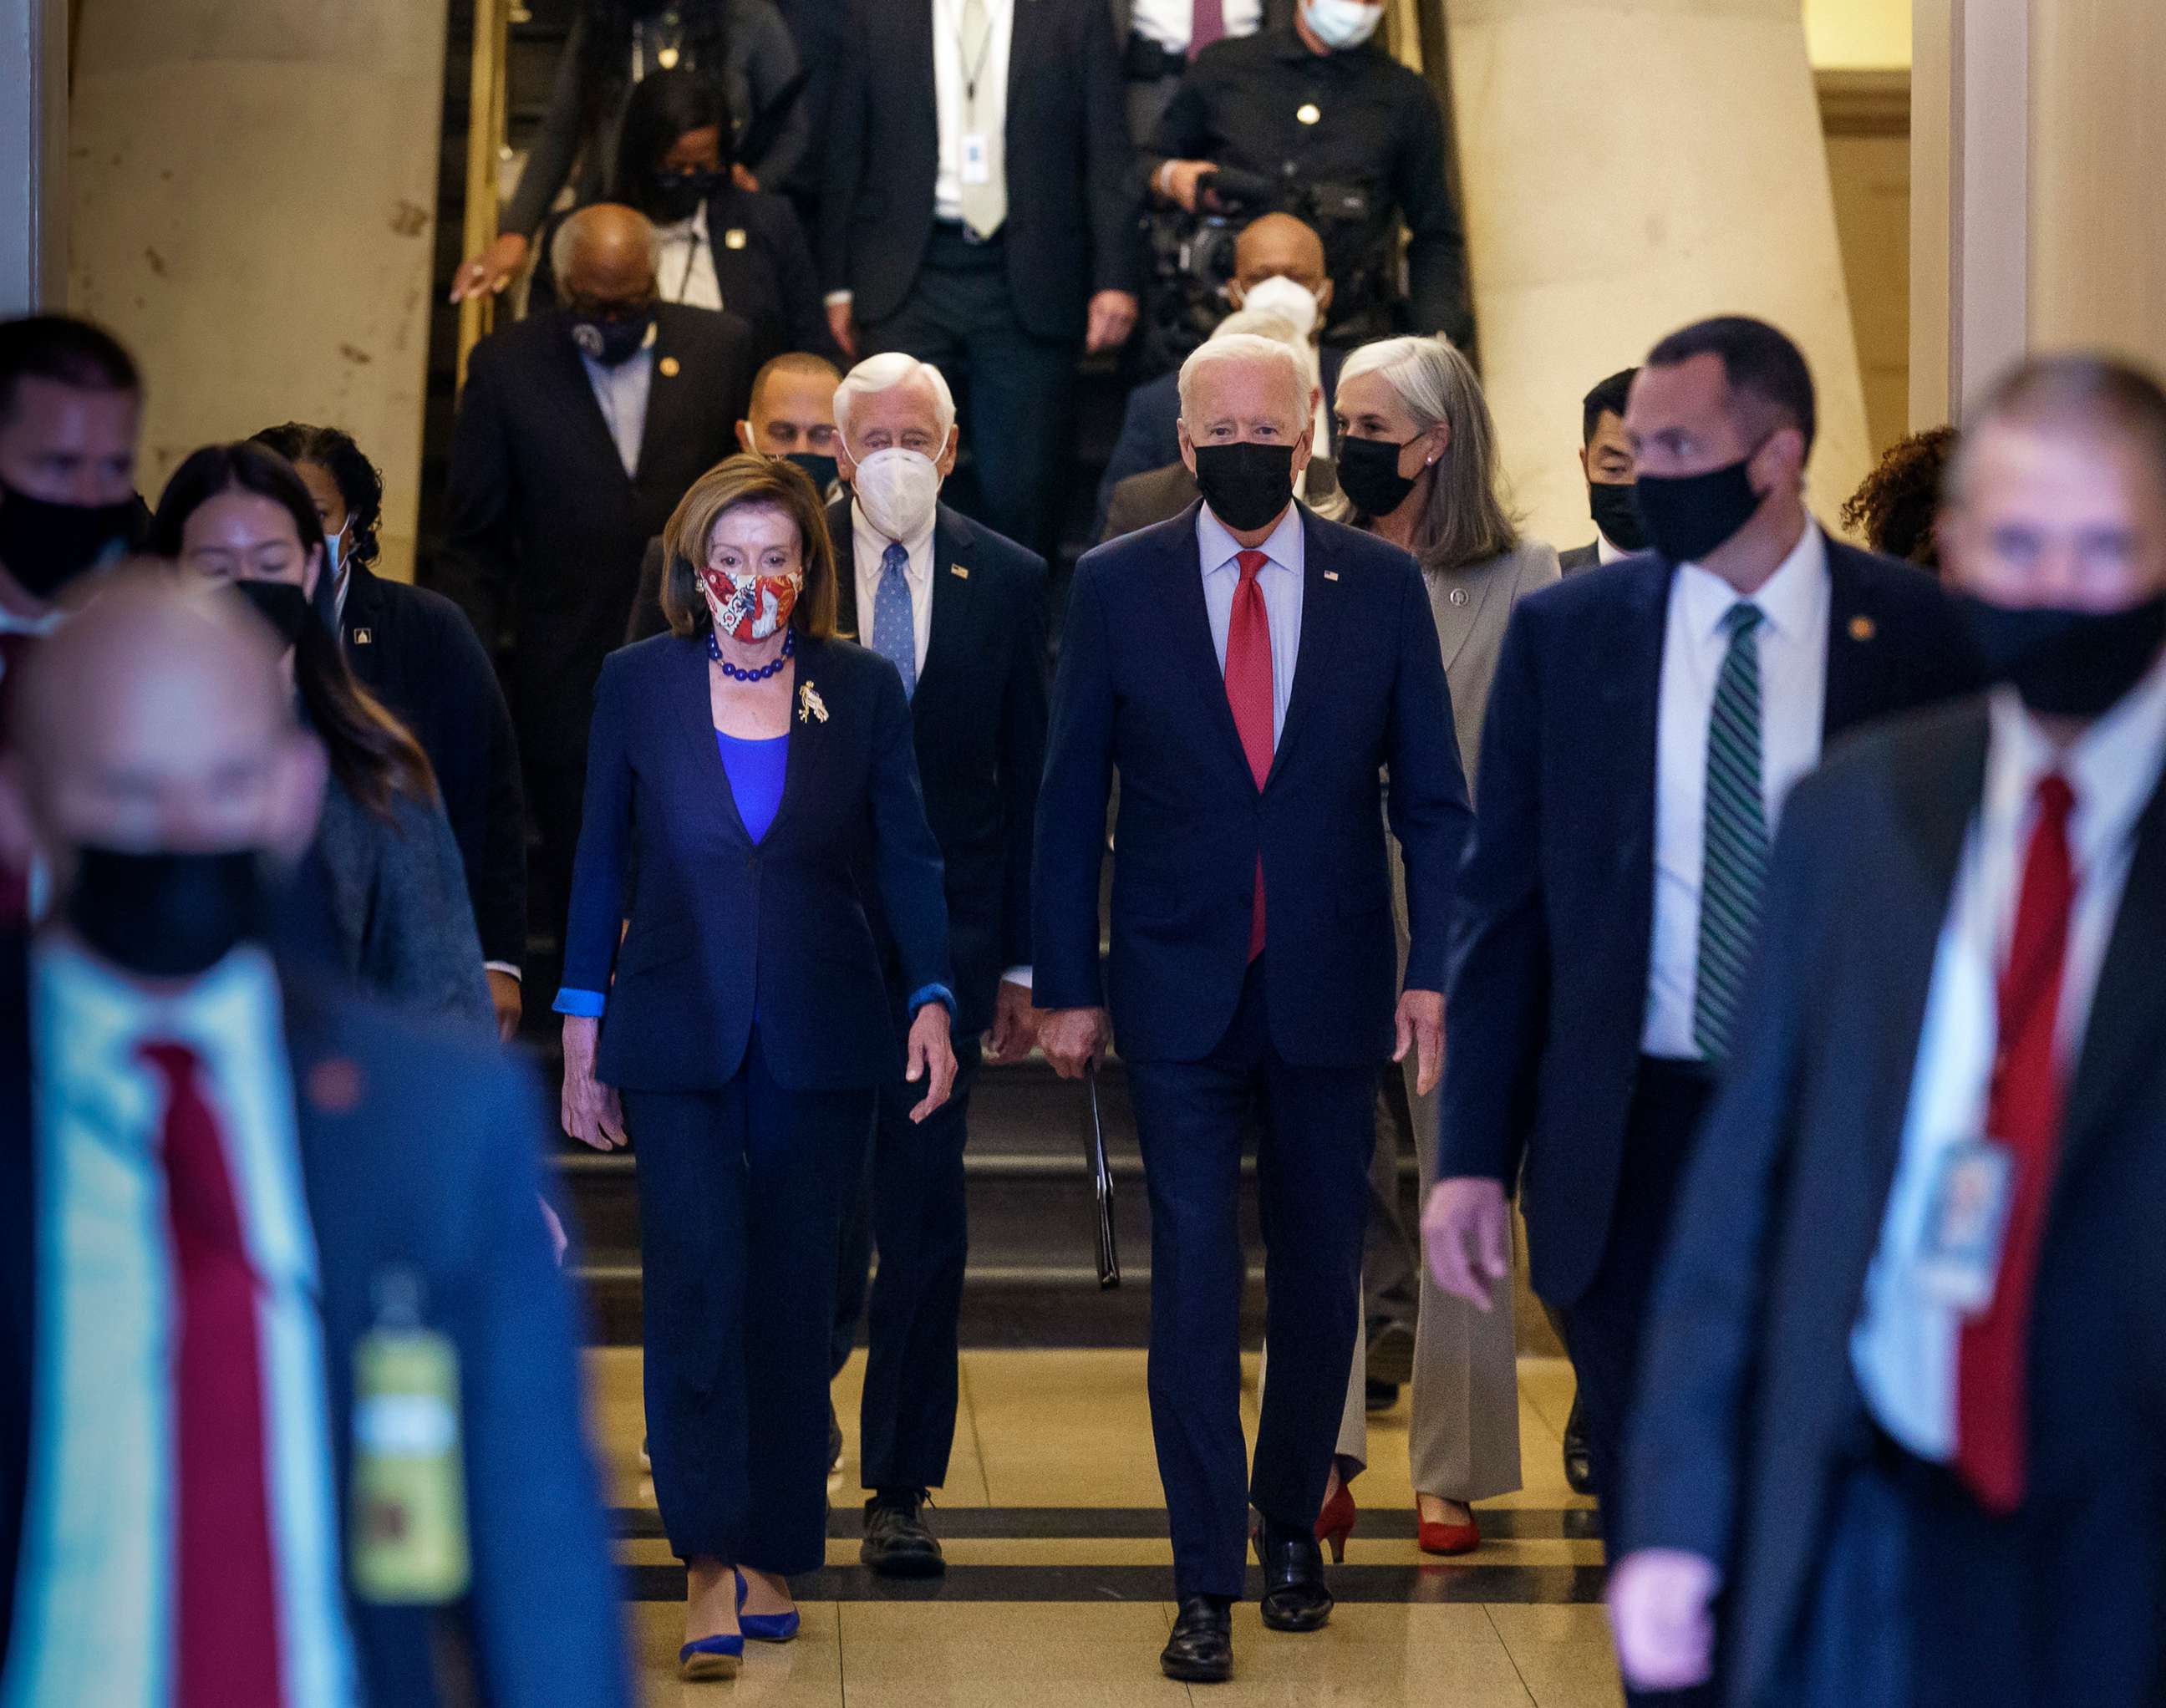 PHOTO: Speaker of the House Nancy Pelosi and President Joe Biden arrive to meet with House Democrats to rescue his social and economic agenda that has been threatened by the progressive wing of the party, at the Capitol, Oct. 1, 2021.